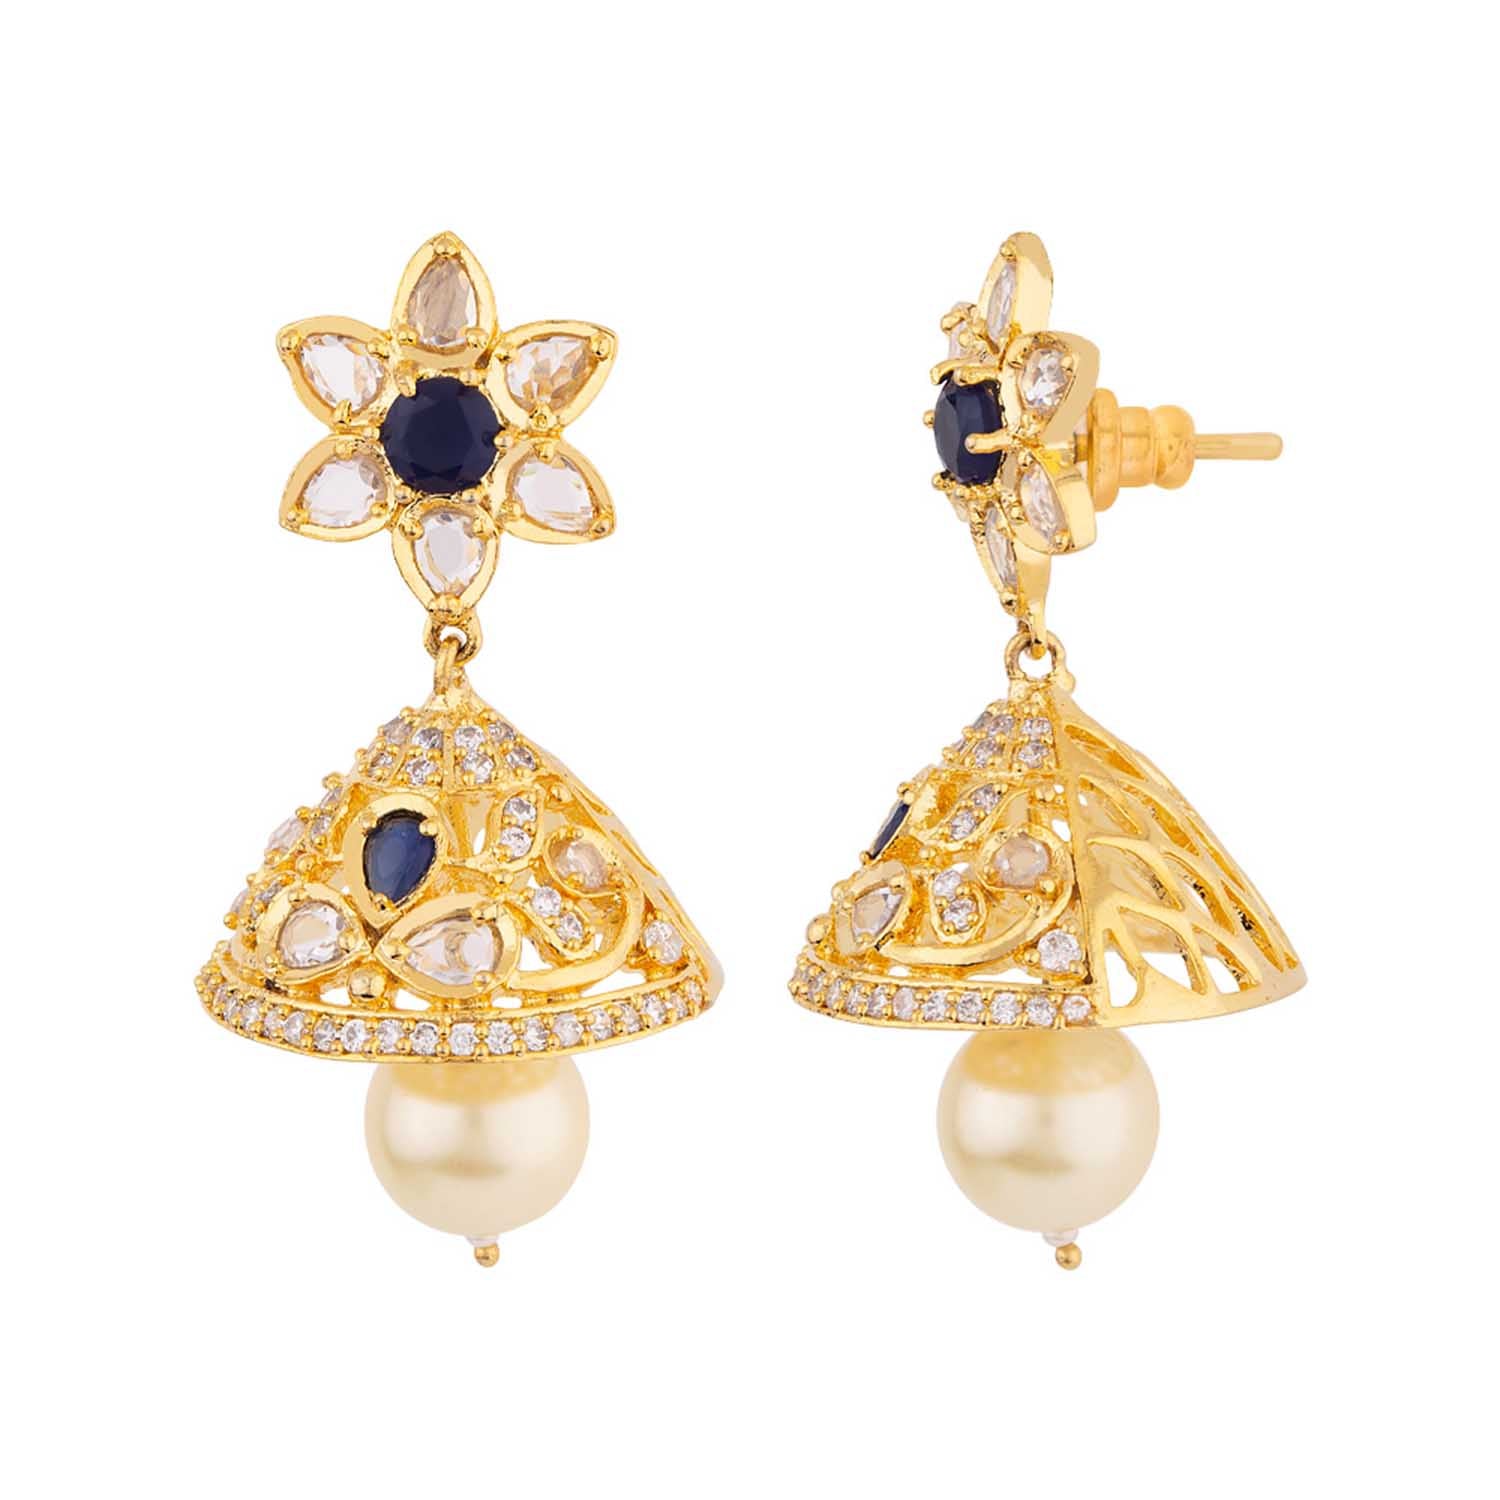 Floral Motifs and CZ Gems Earrings